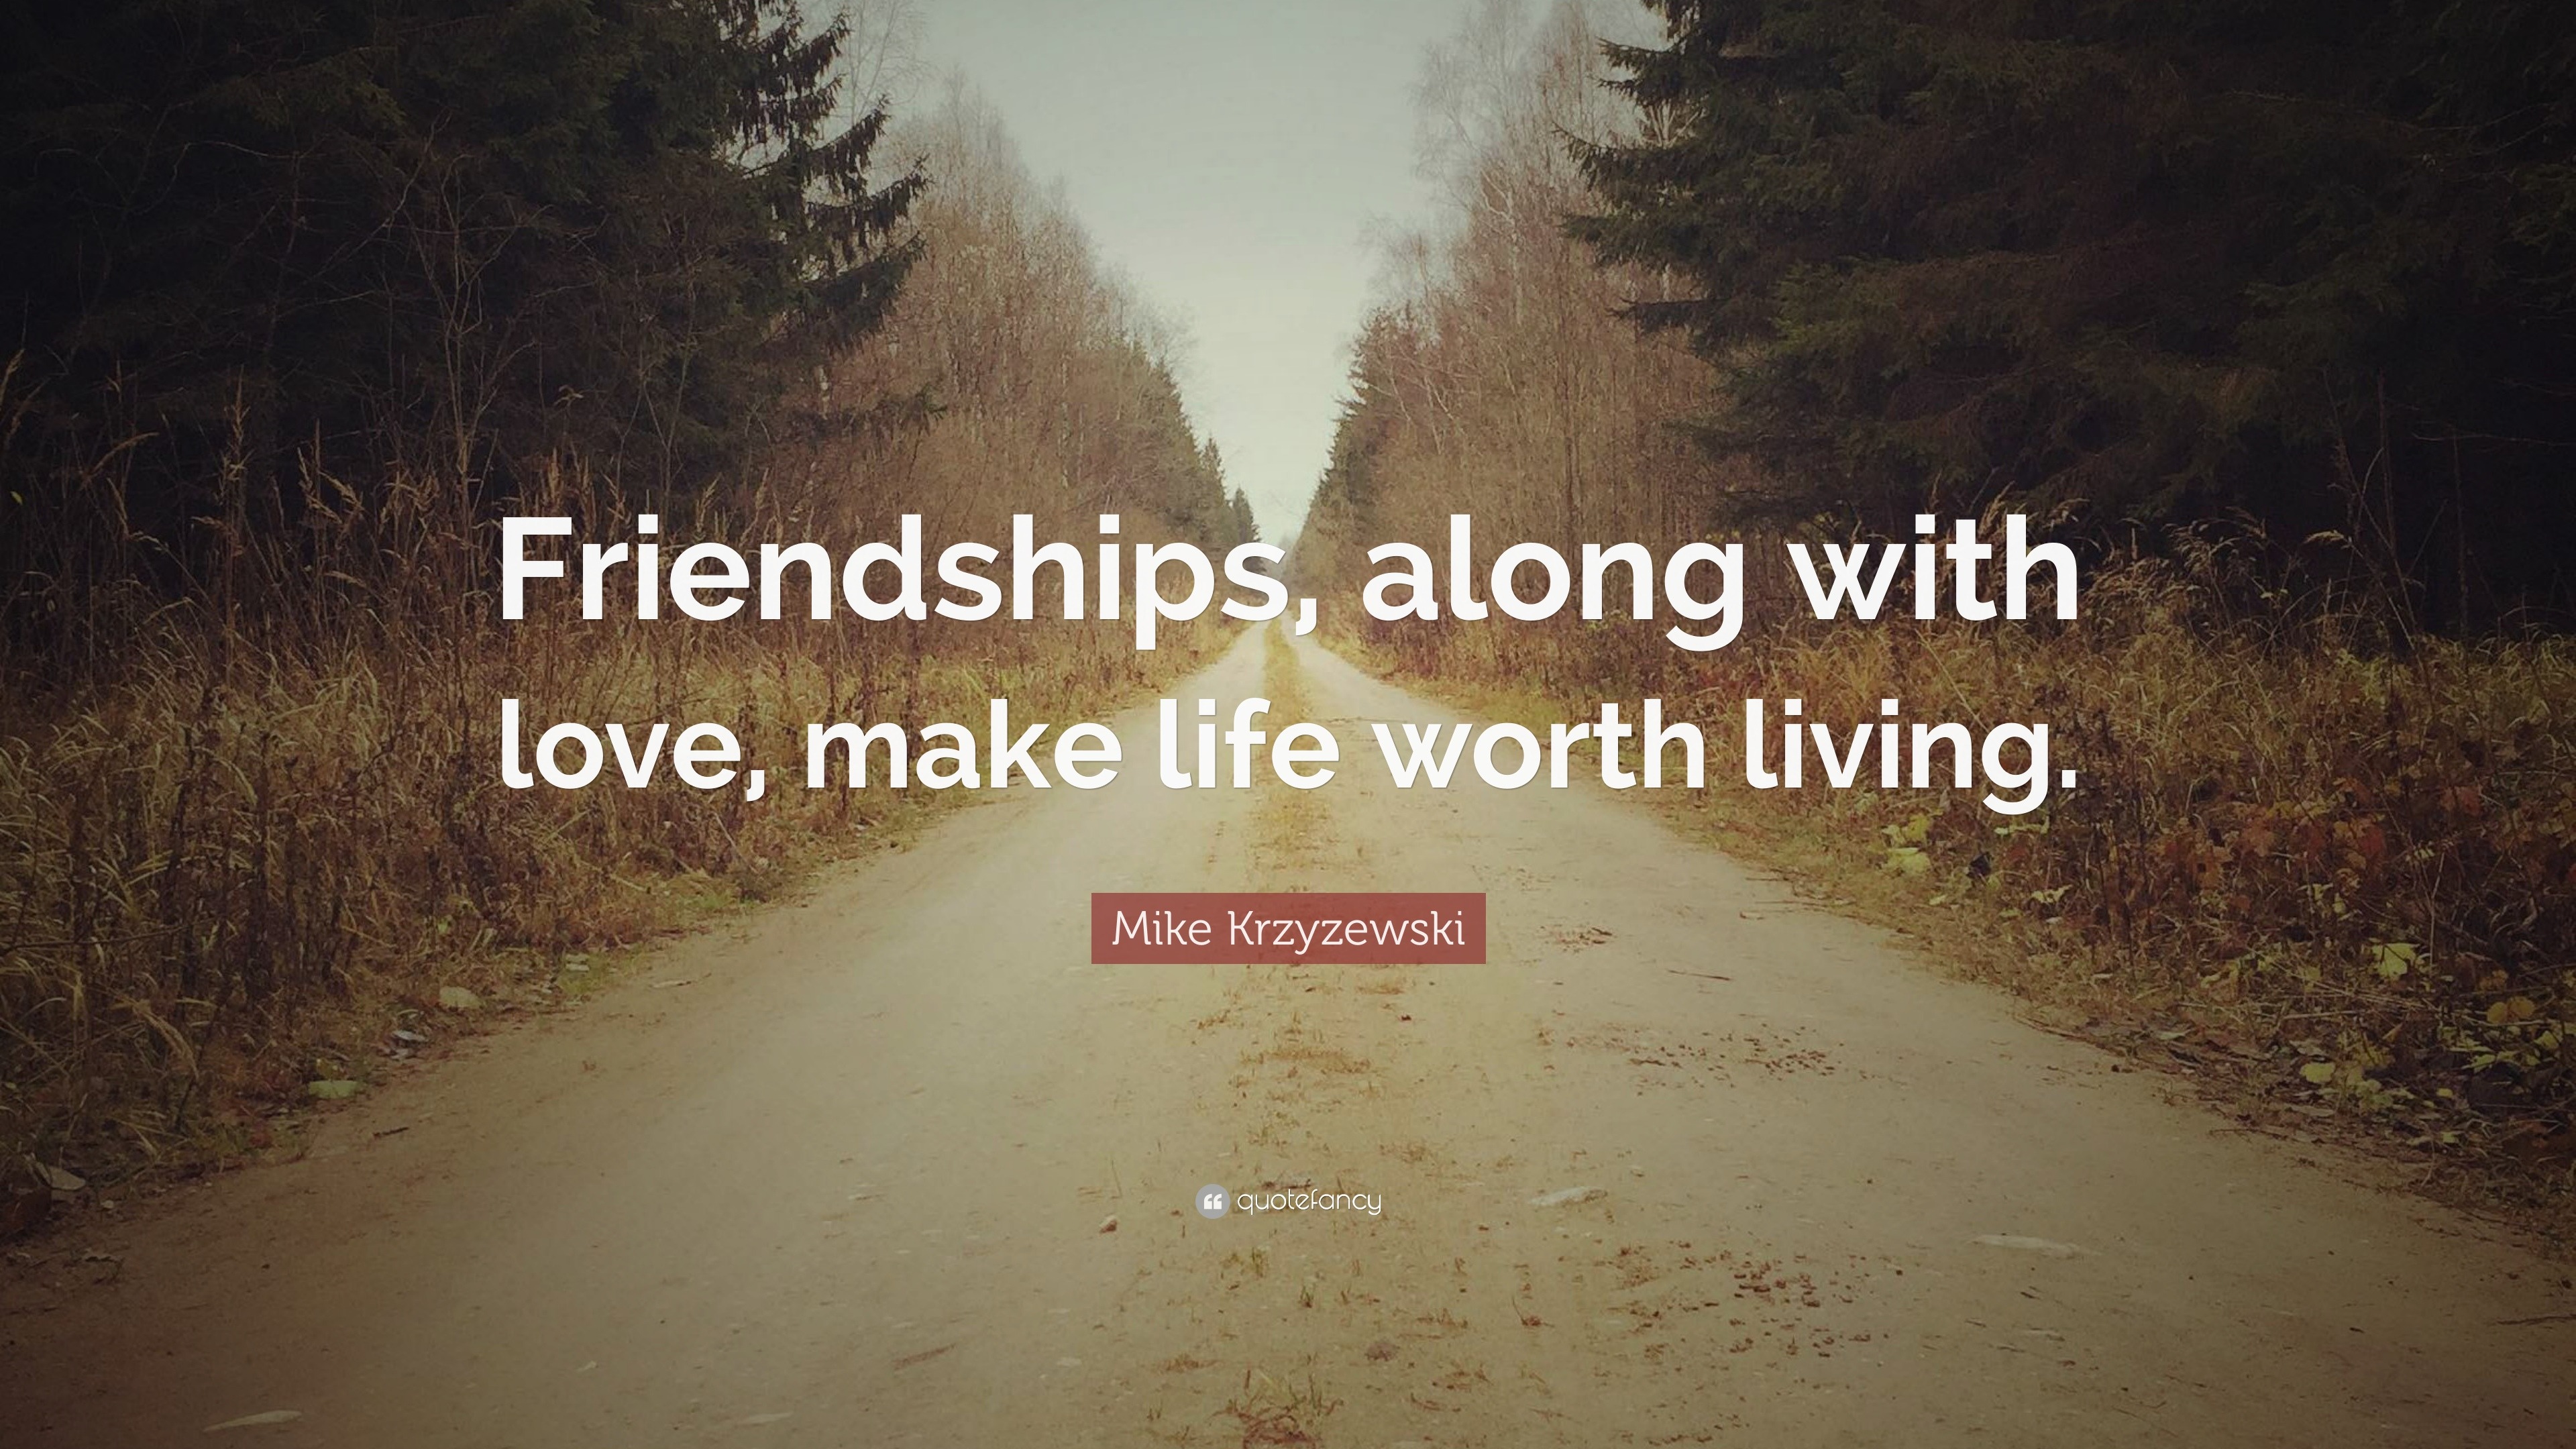 Mike Krzyzewski Quote “Friendships along with love make life worth living